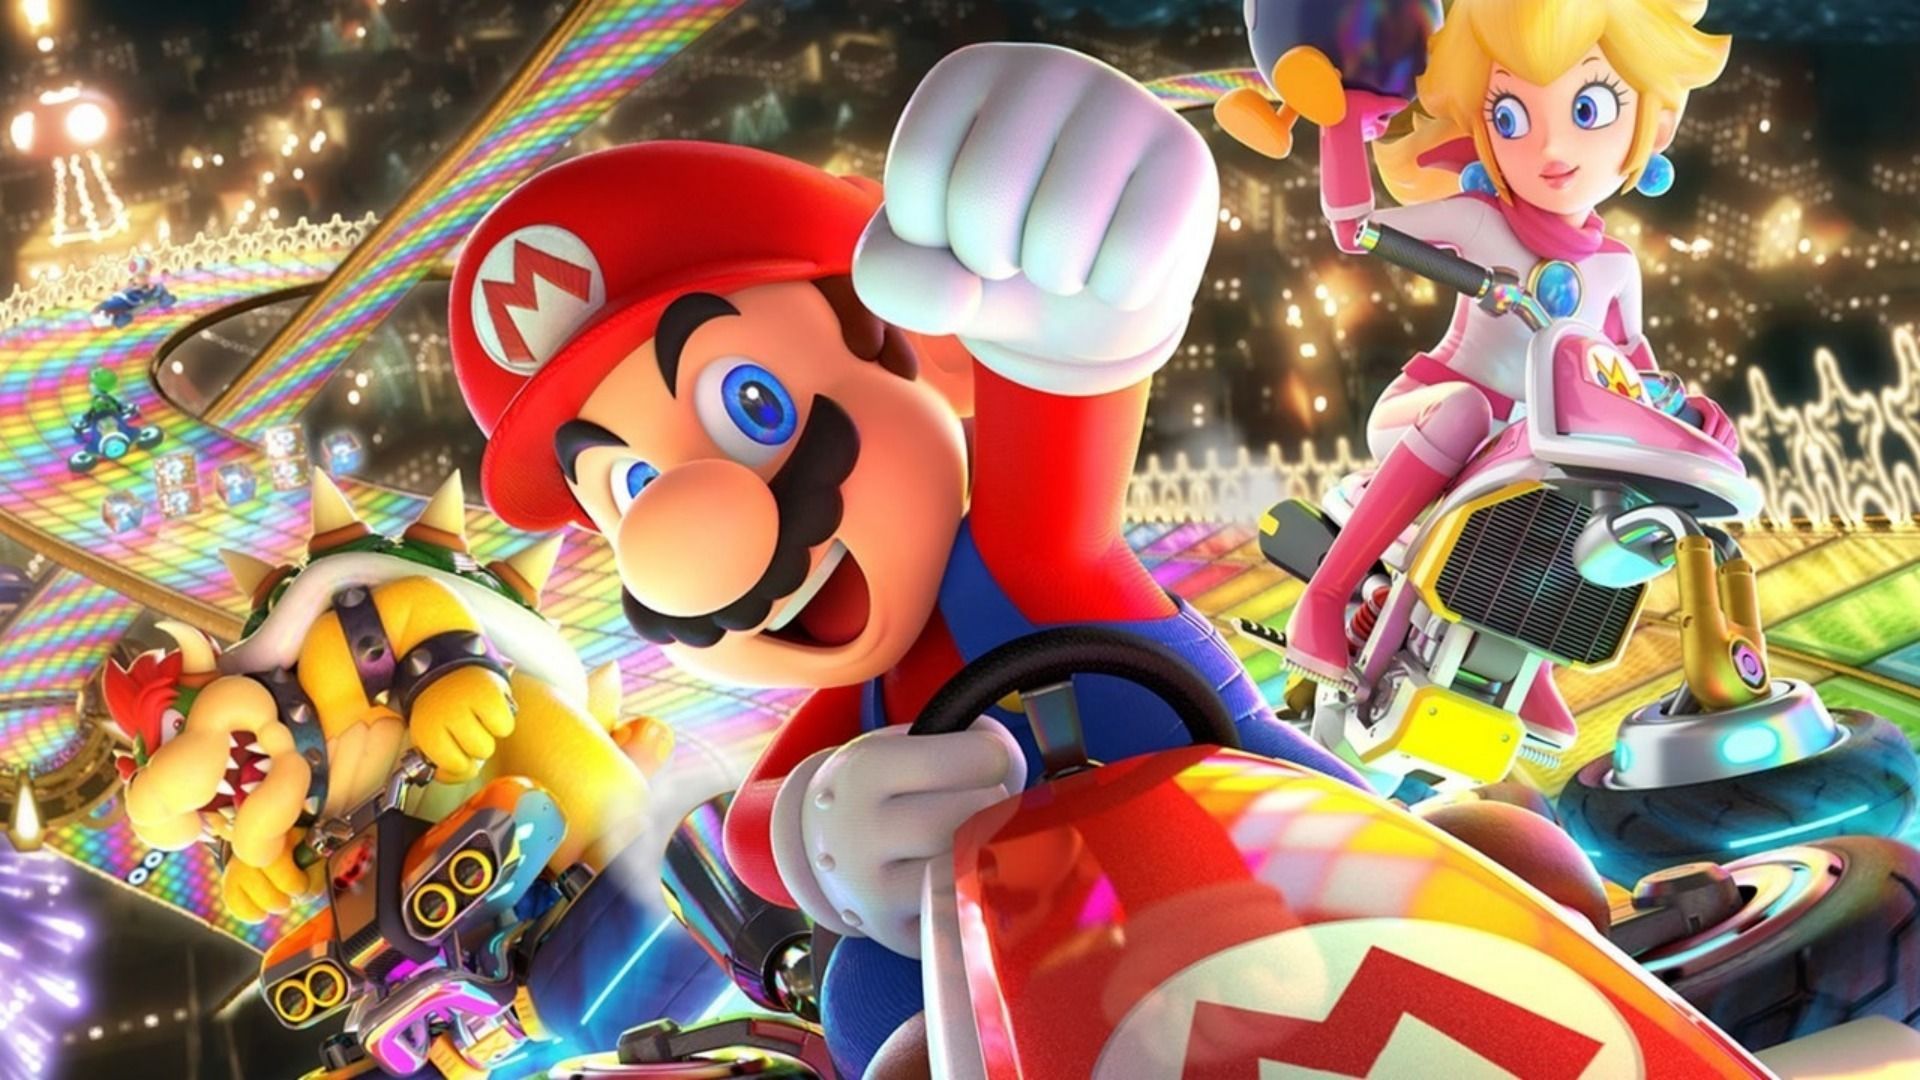 Mario Kart mobile game hits your Android, iPhone on Sept. 25 - CNET